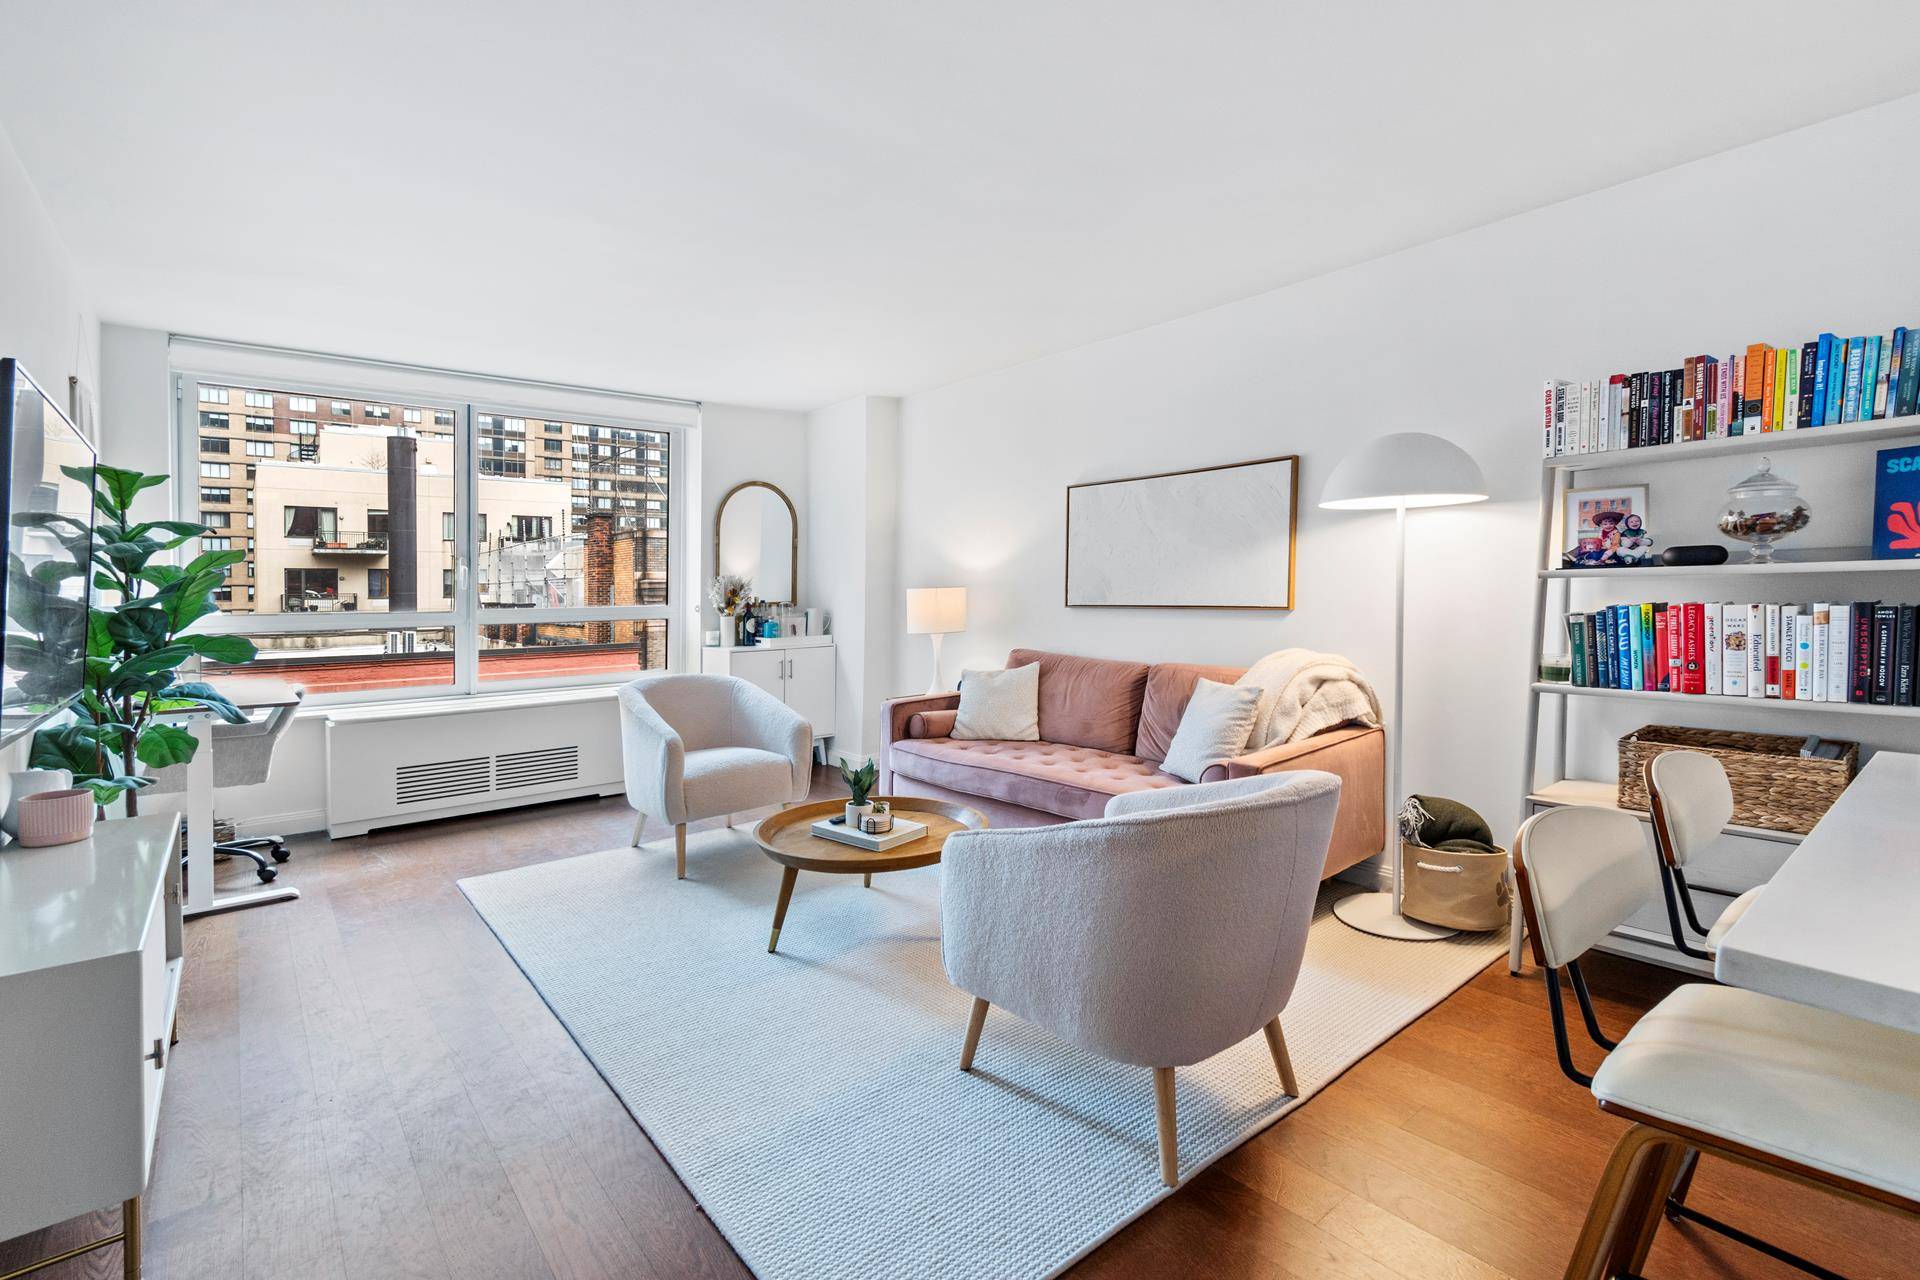 Welcome home to this one bedroom, one bathroom corner unit home and experience modern luxury living at the Carnegie Park Condominium.